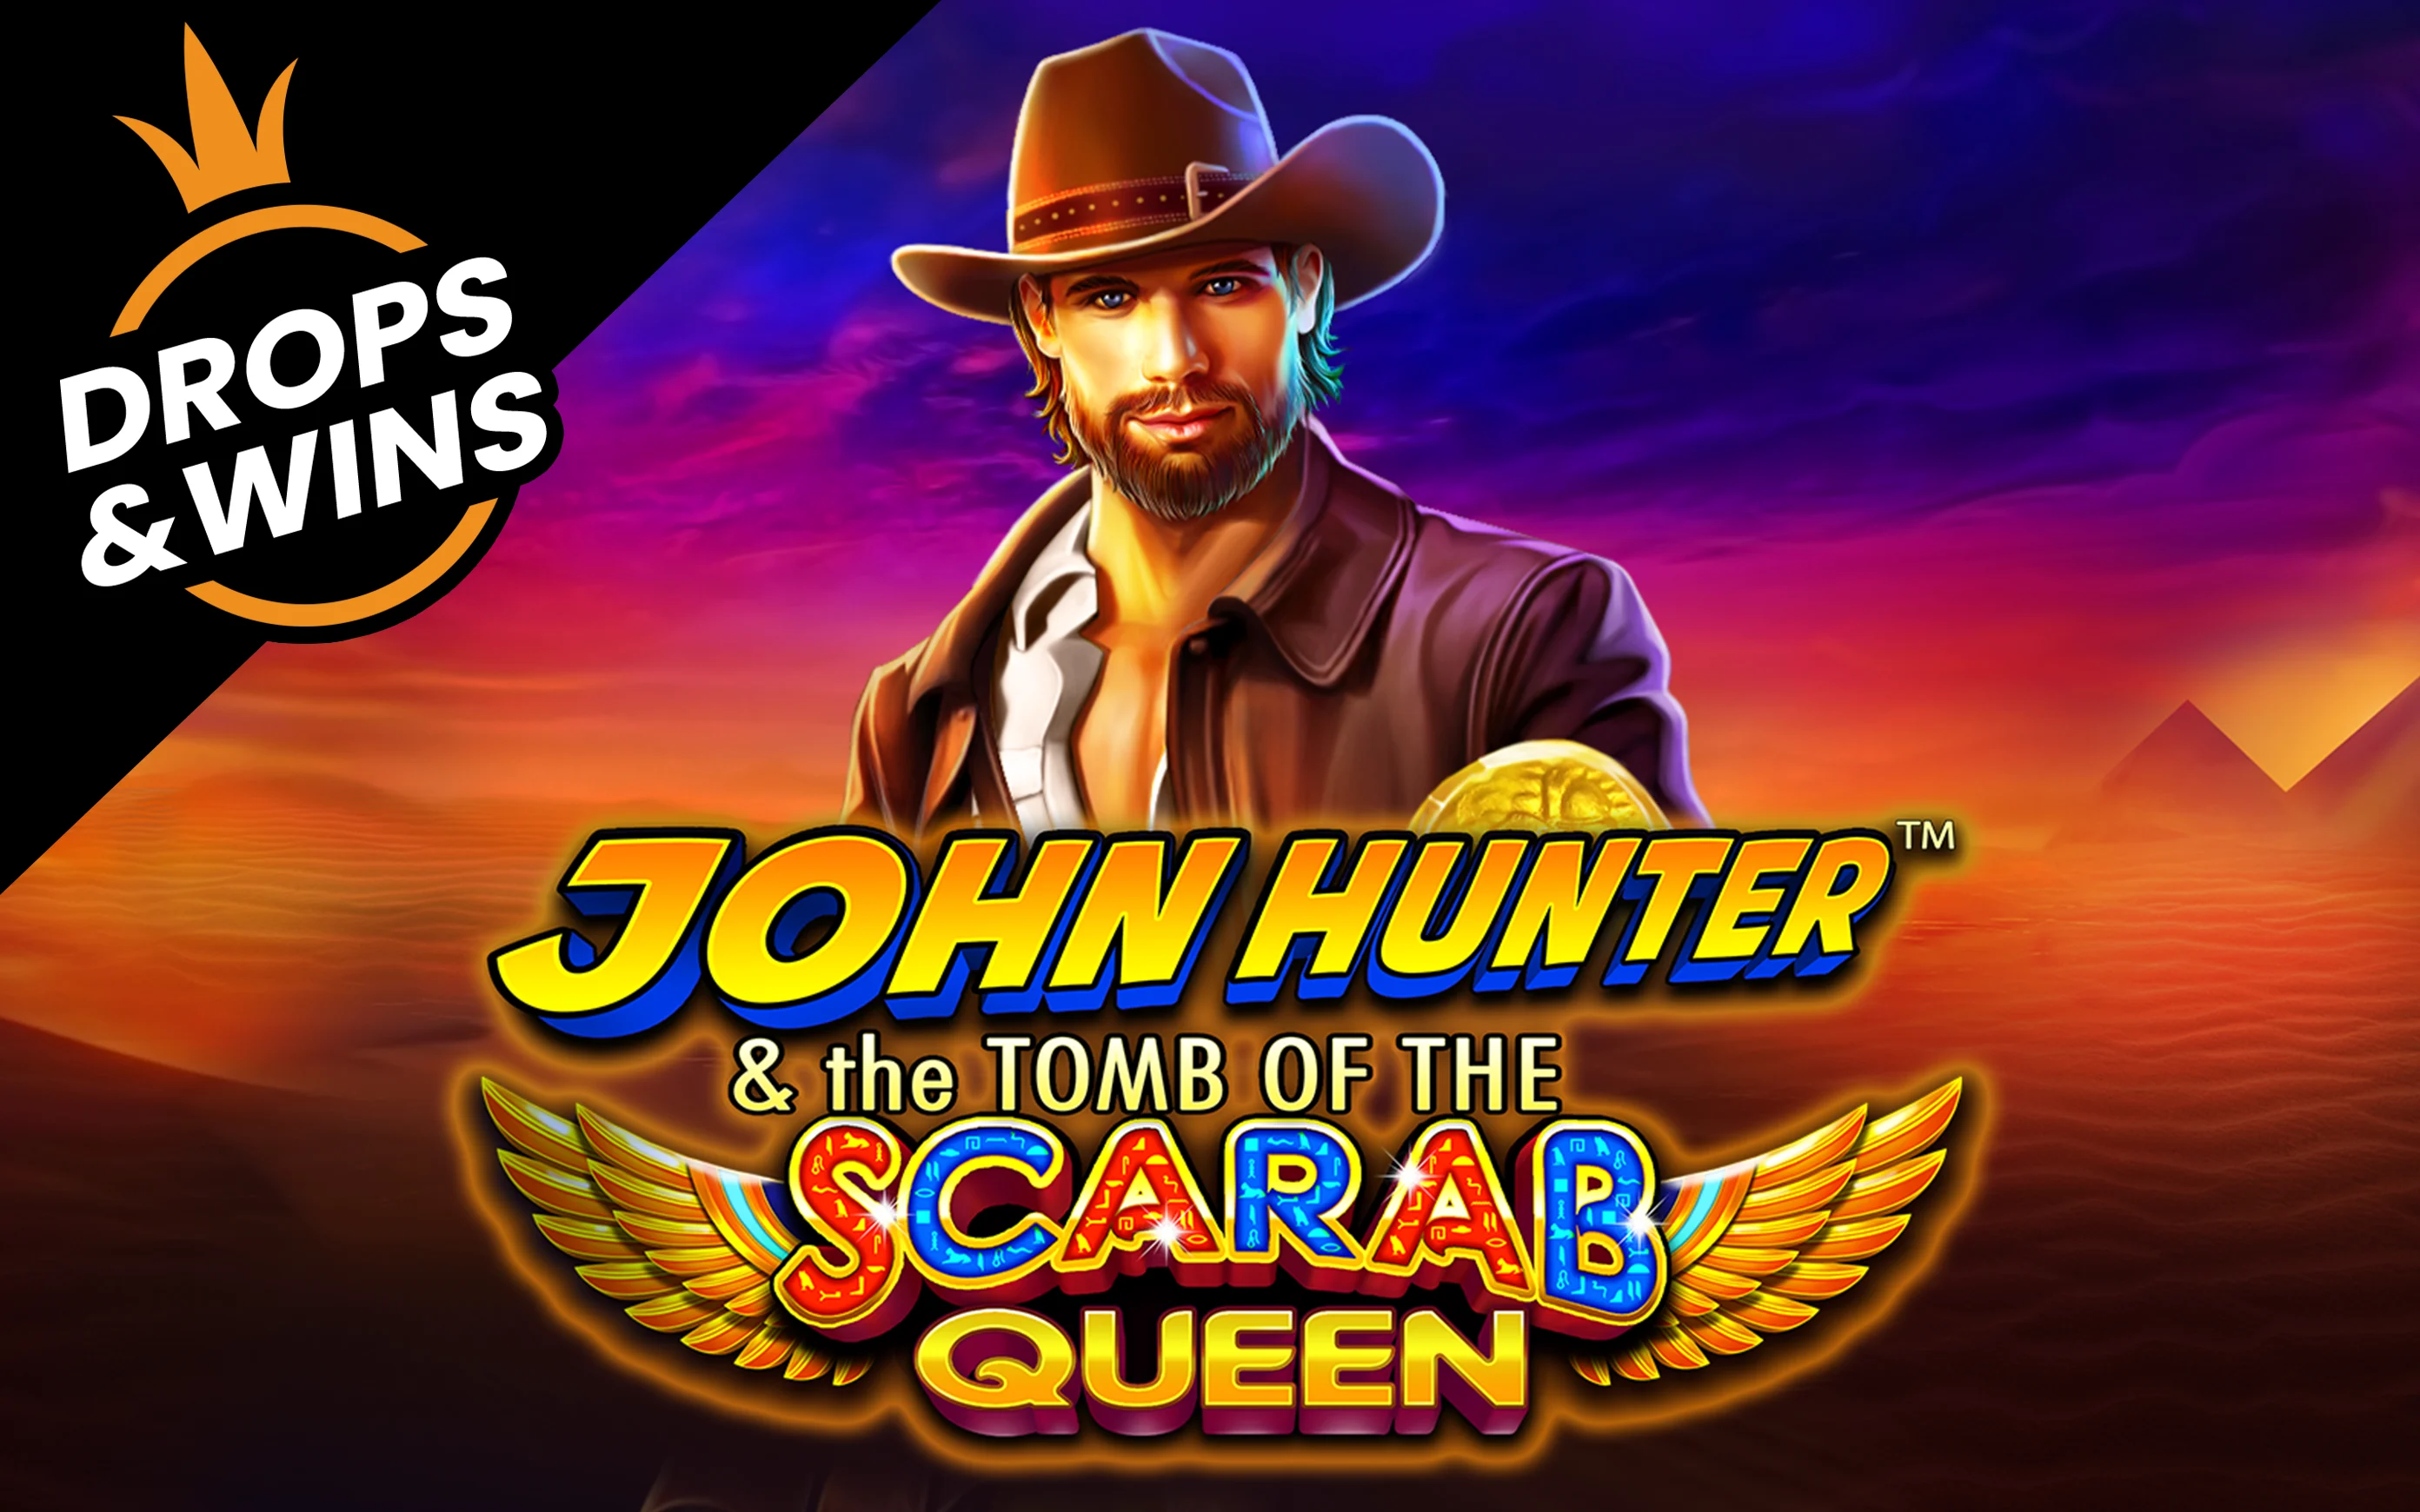 Spil John Hunter and the Tomb of the Scarab Queen™ på Starcasino.be online kasino
